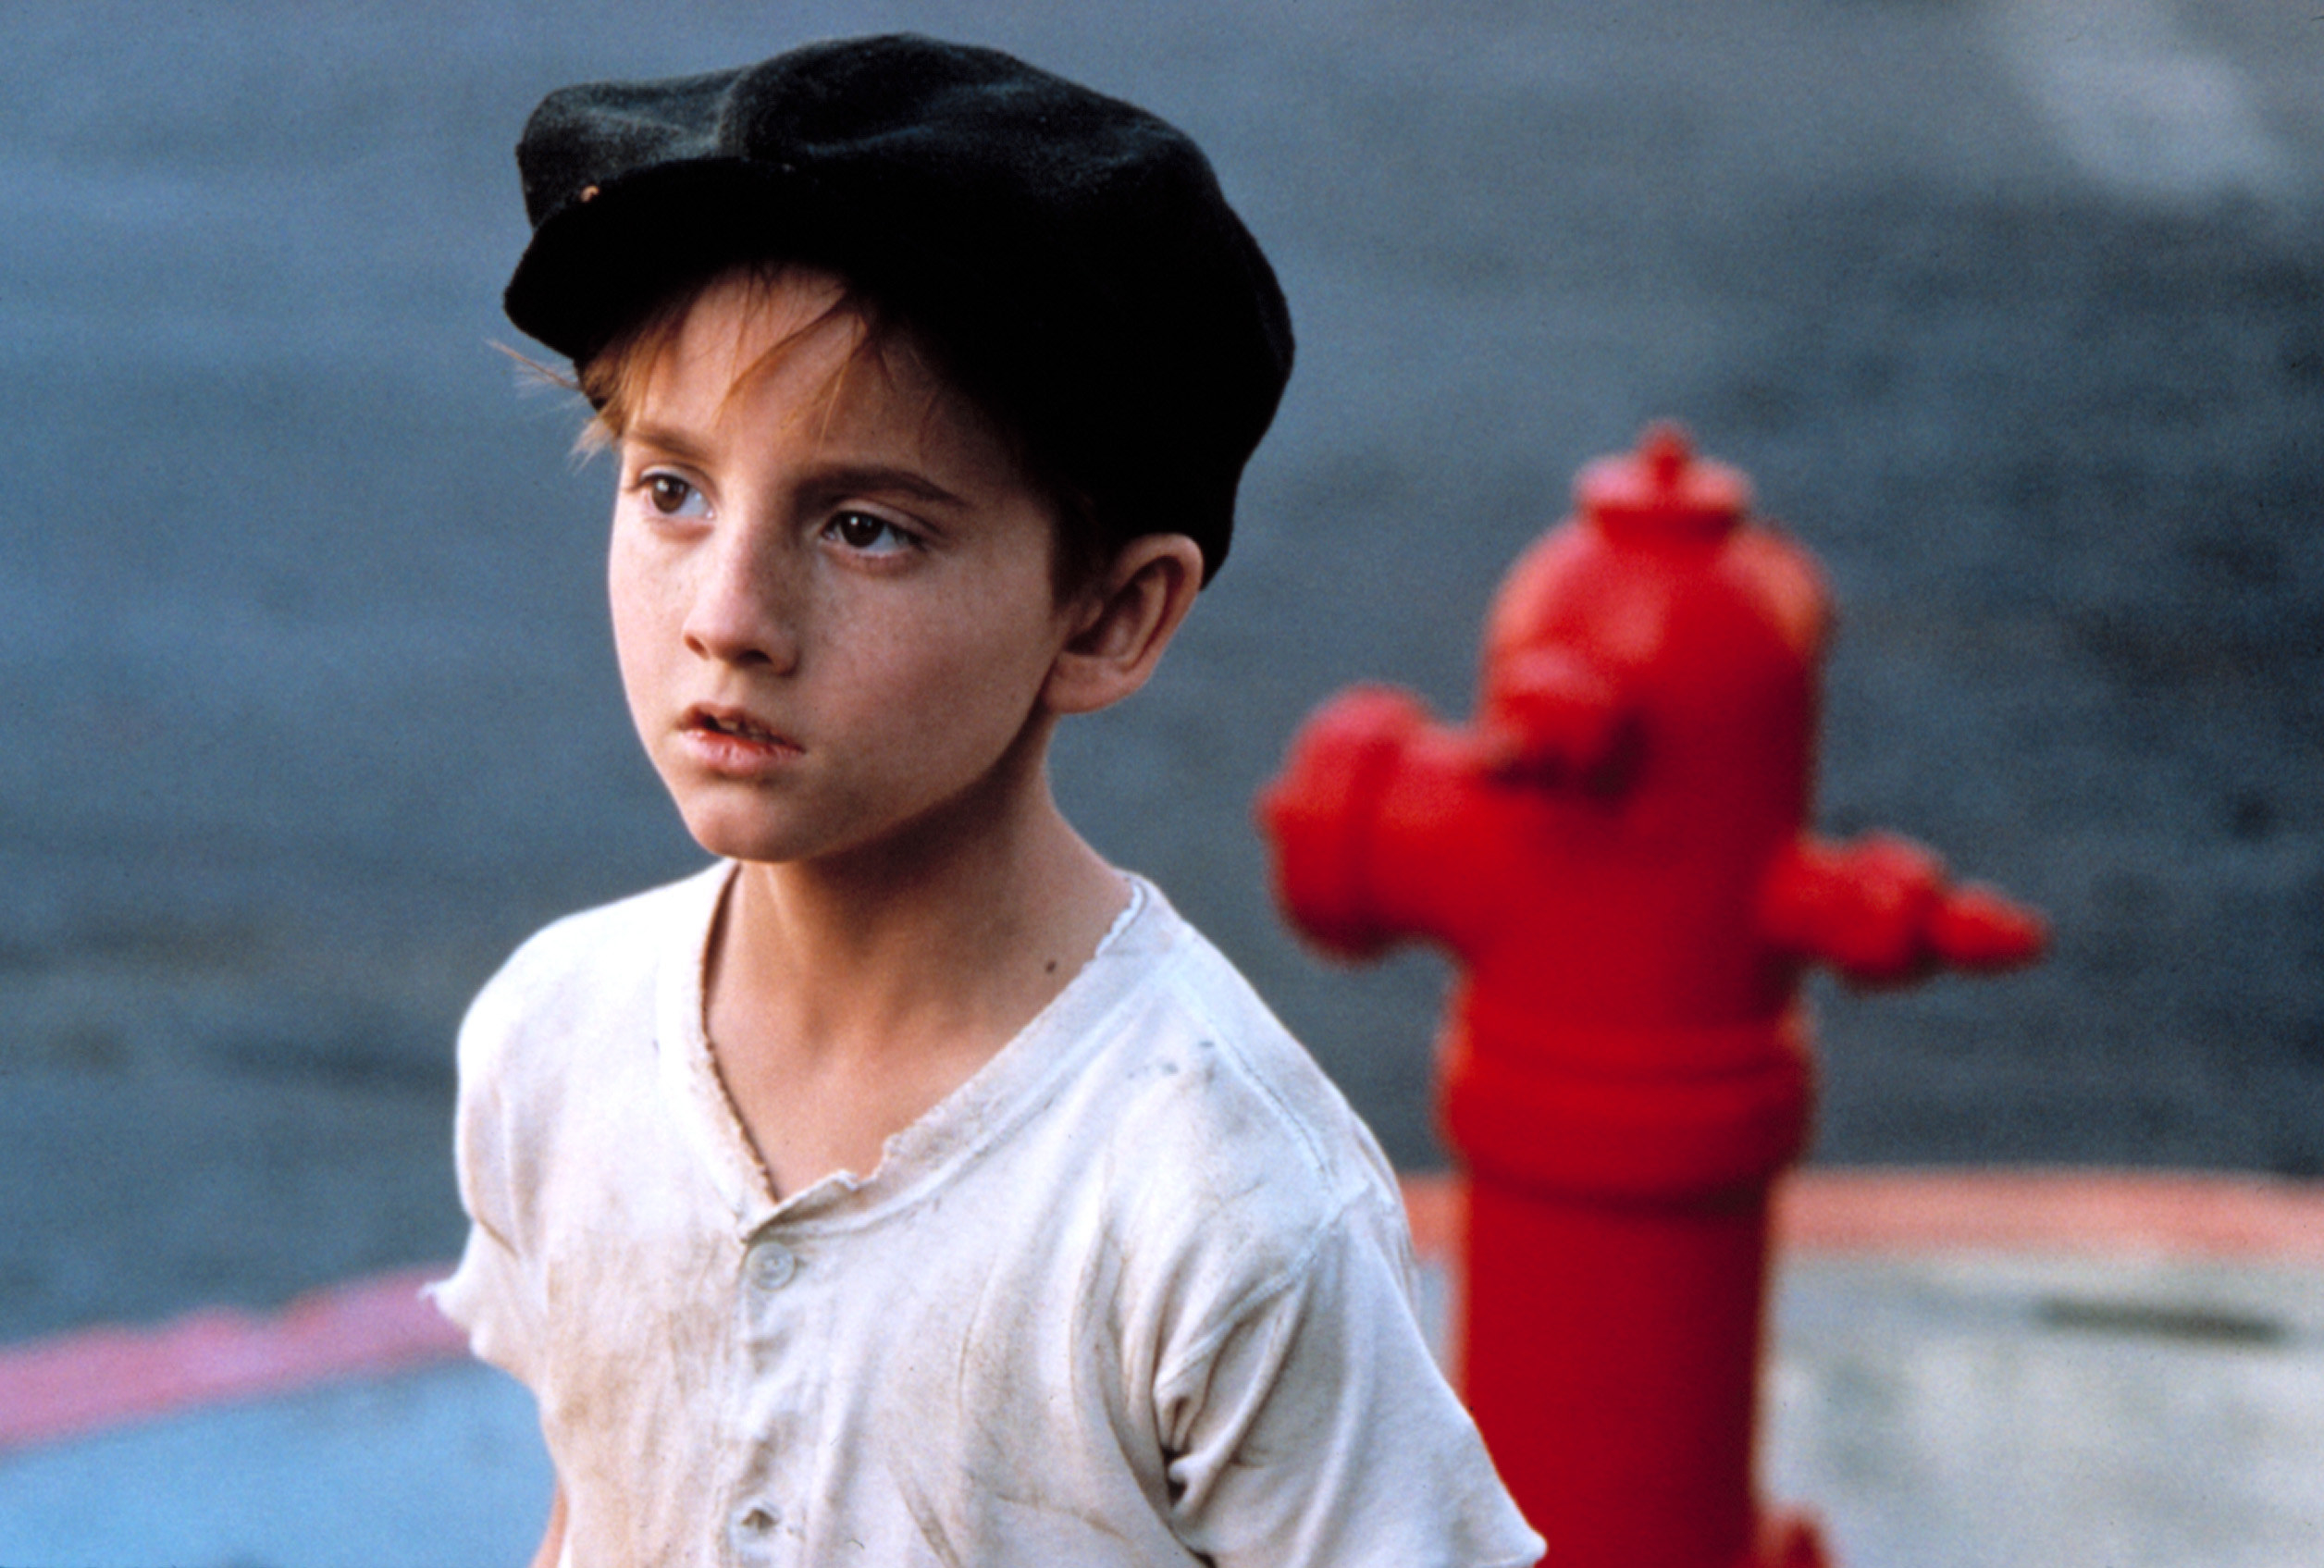 Charlie as a child wearing a cap and standing in front of a fire hydrant